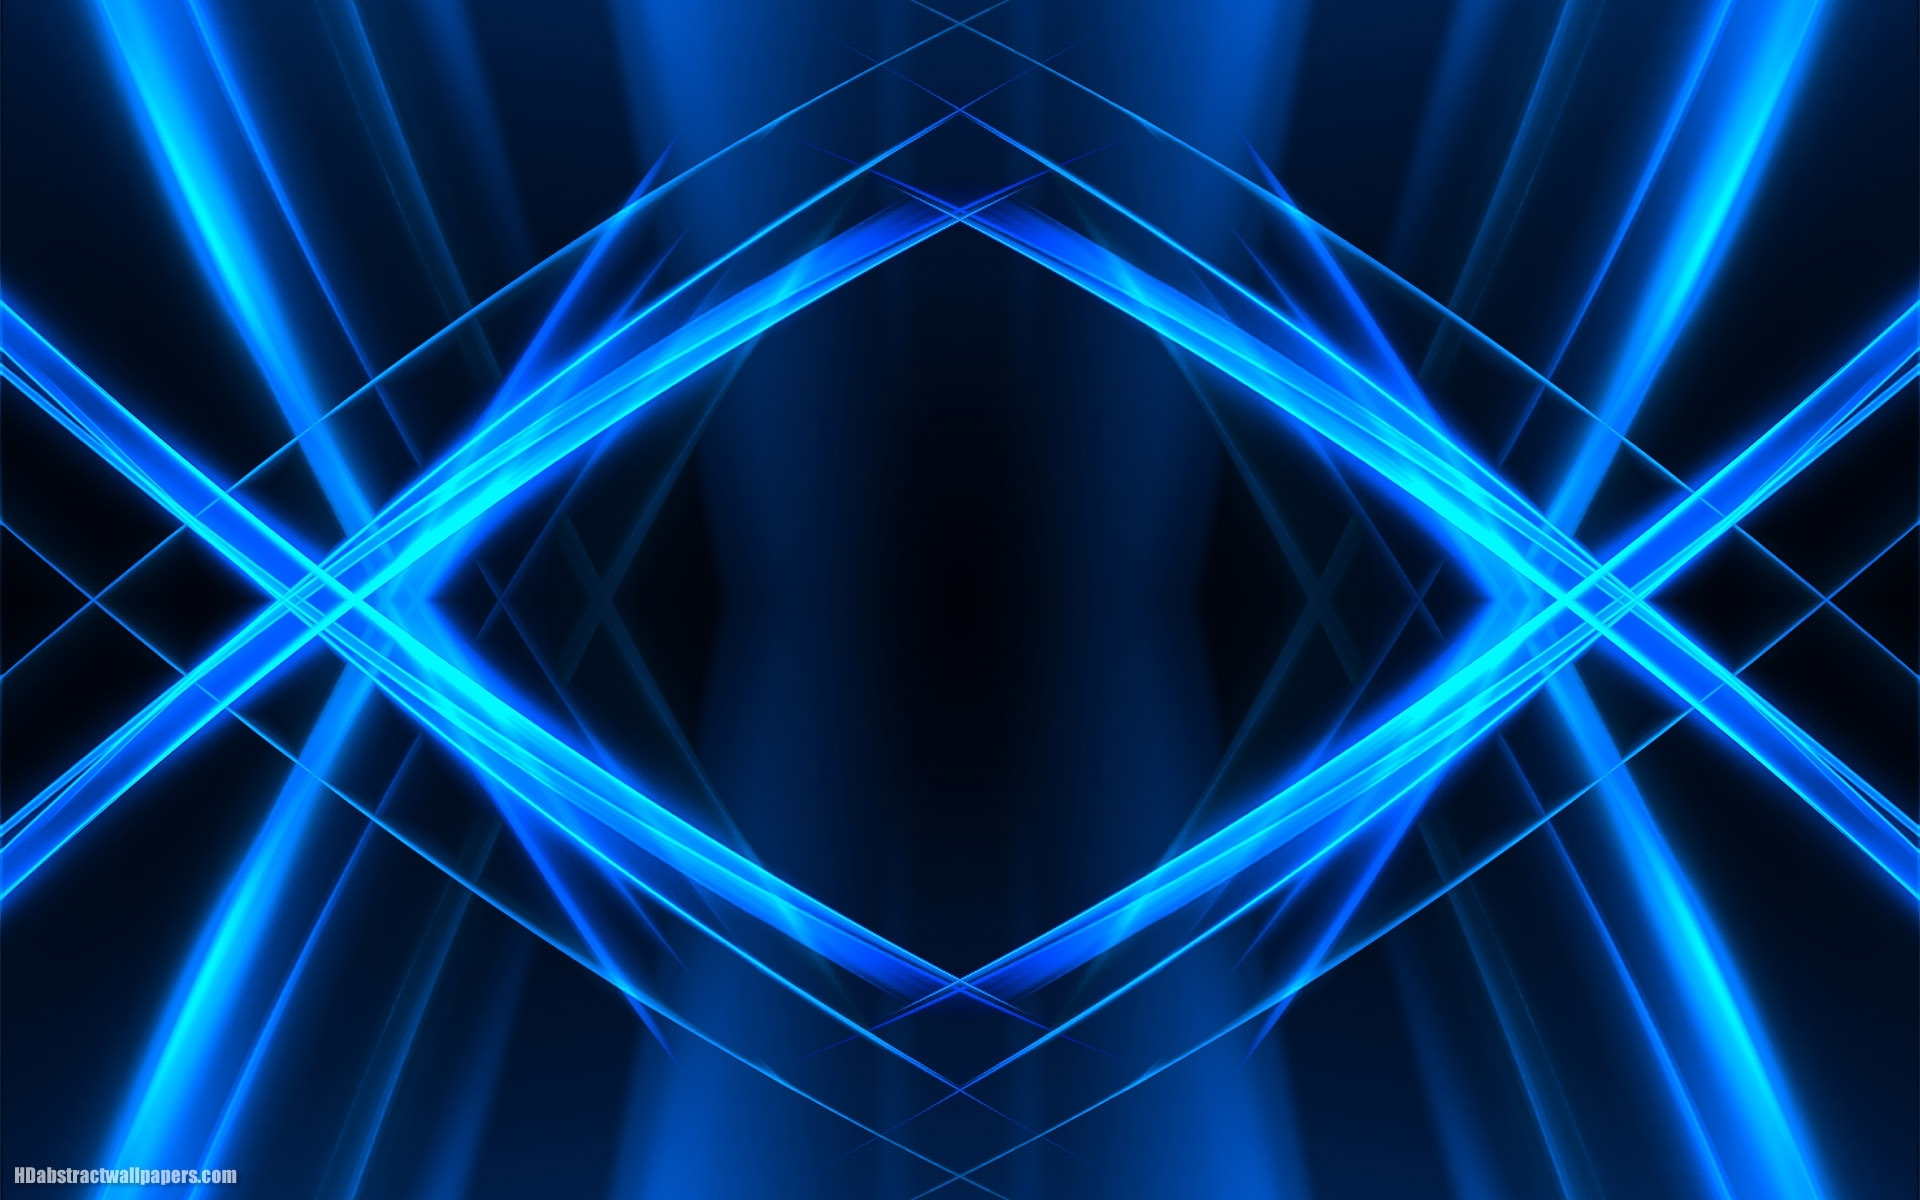 10 Latest Blue And Black Abstract Wallpaper FULL HD 1080p For PC